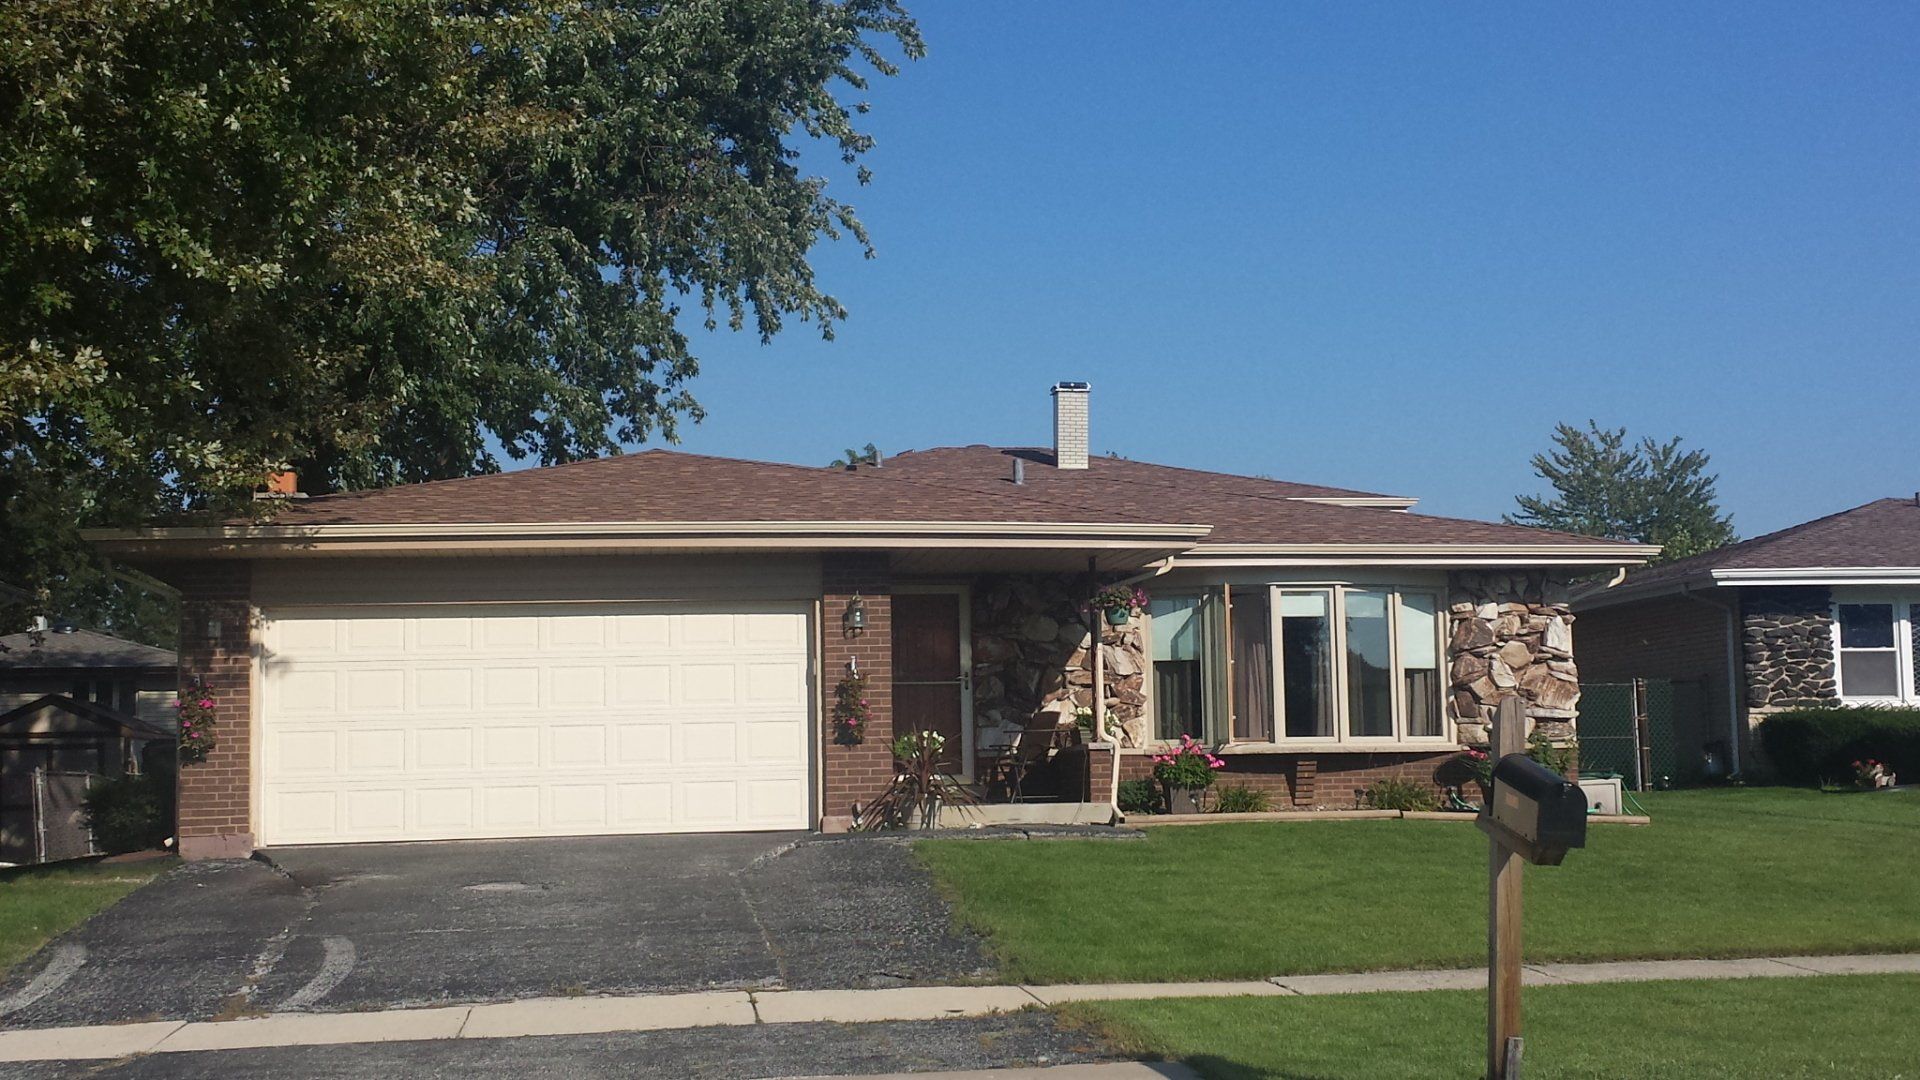 The roof was completed in the summer of 2014 in Oak Forest, IL